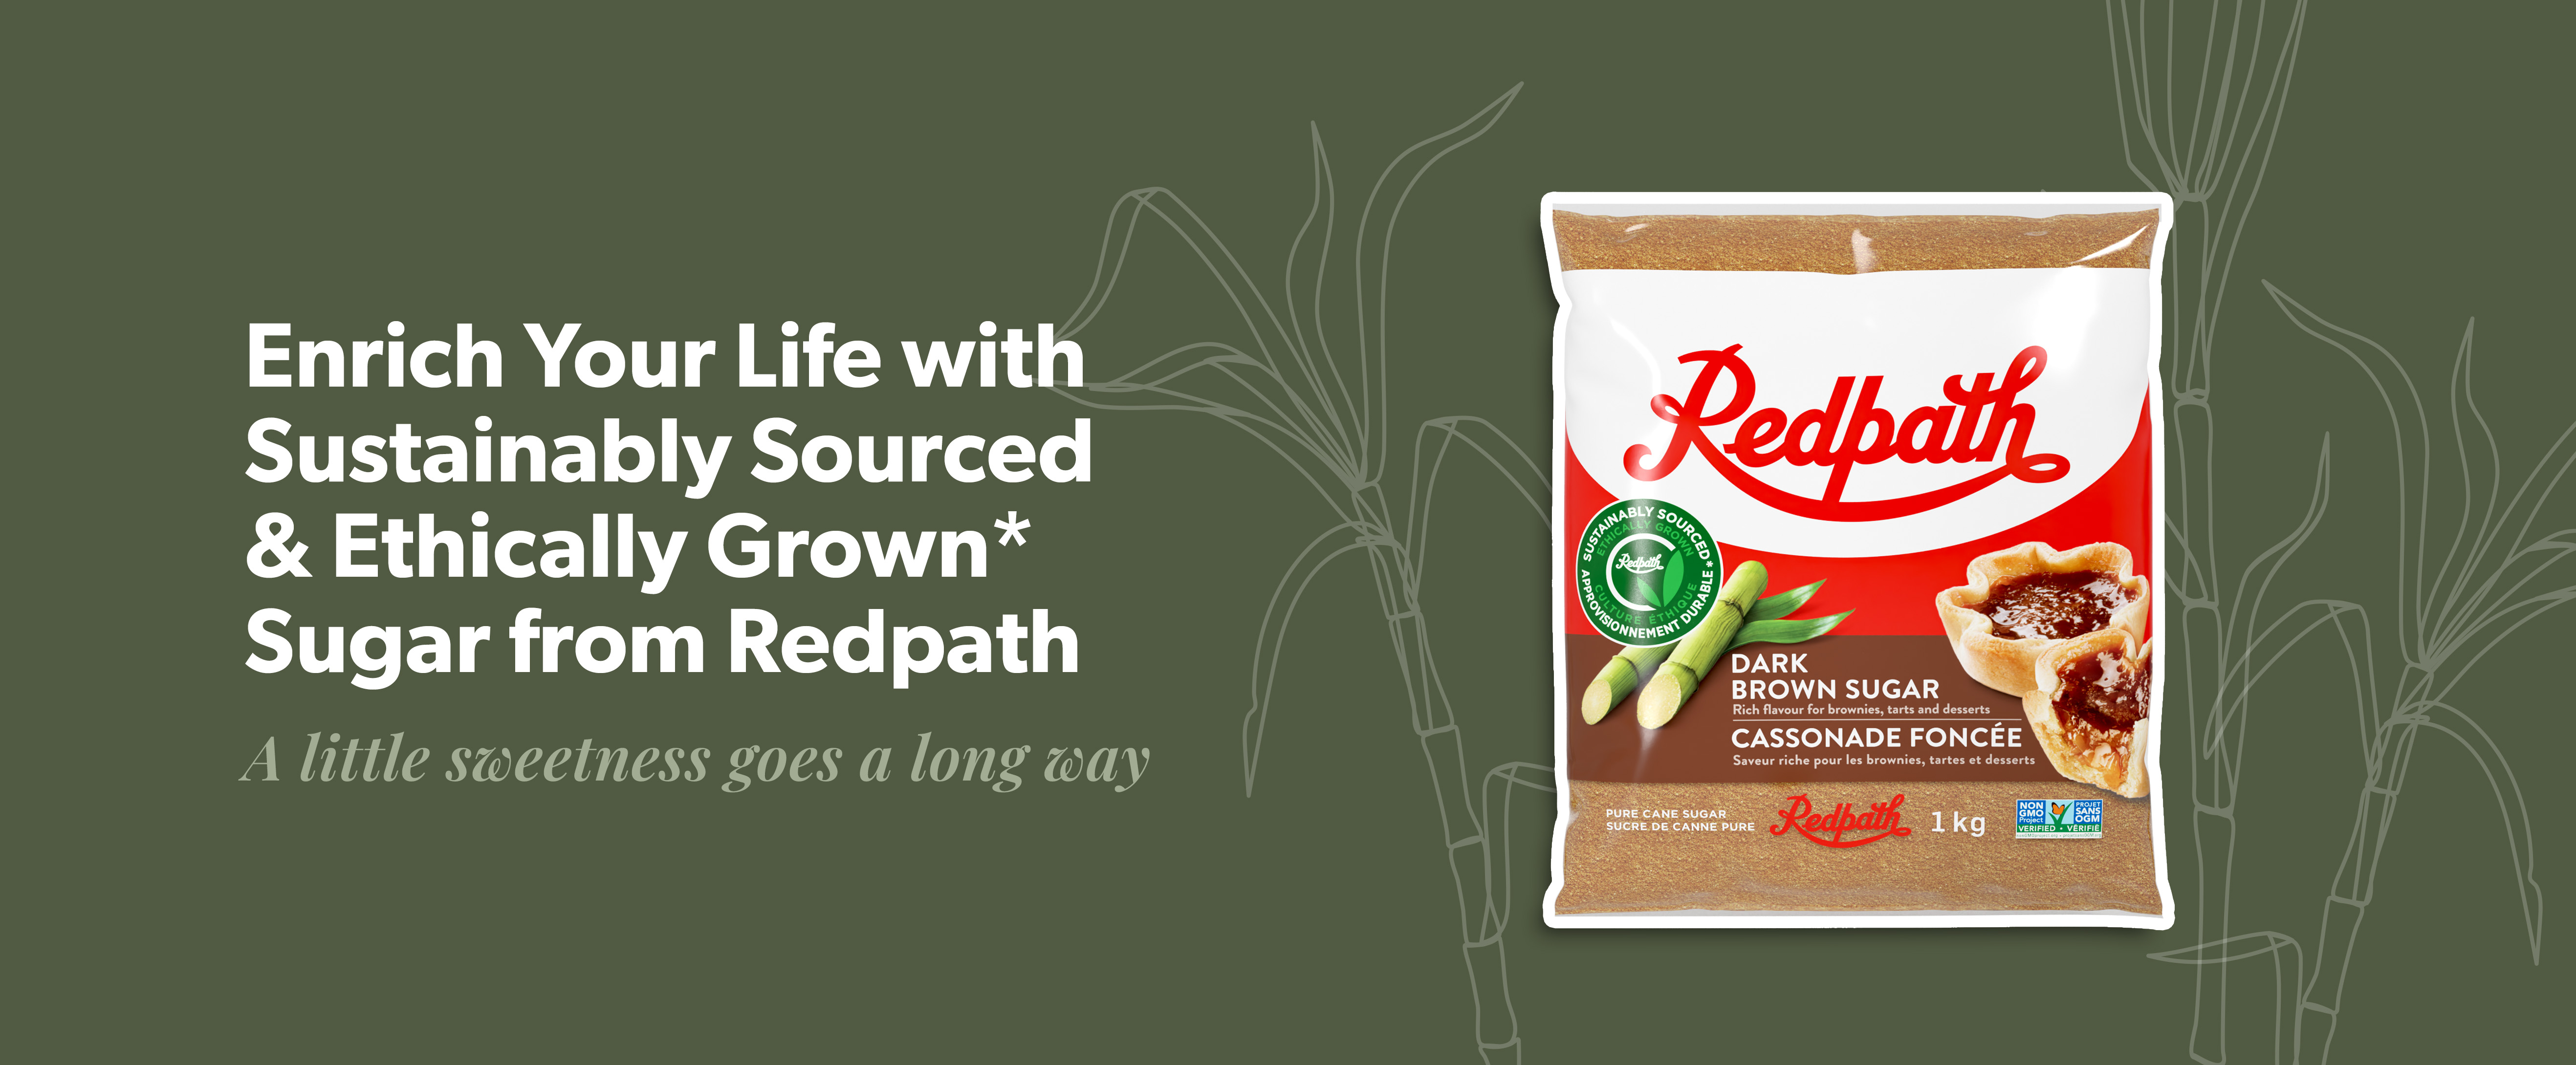 A bag of Redpath Dark Brown Sugar with text A little sweetness goes a long way